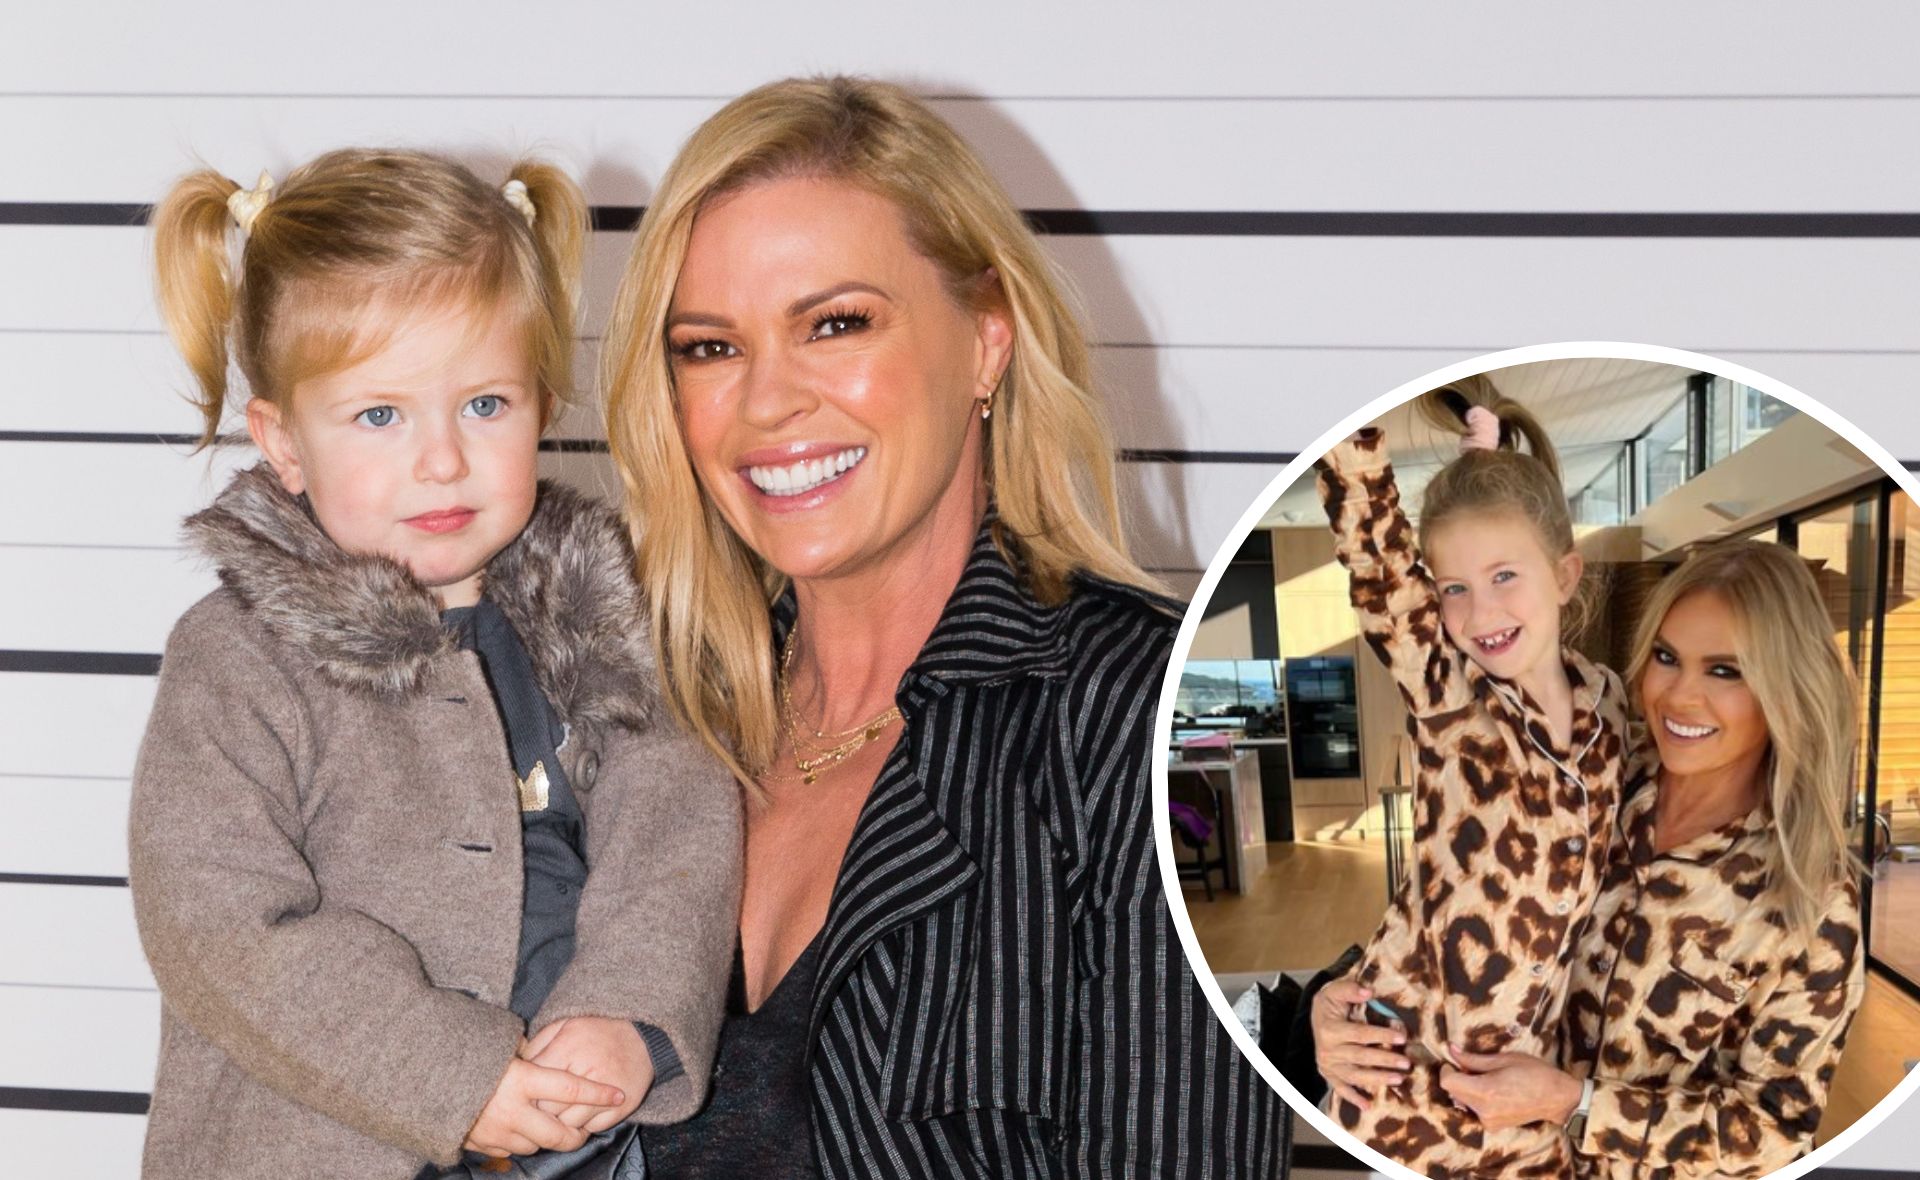 These rare photos prove that Sonia Kruger and daughter Maggie are the ultimate mother-daughter duo